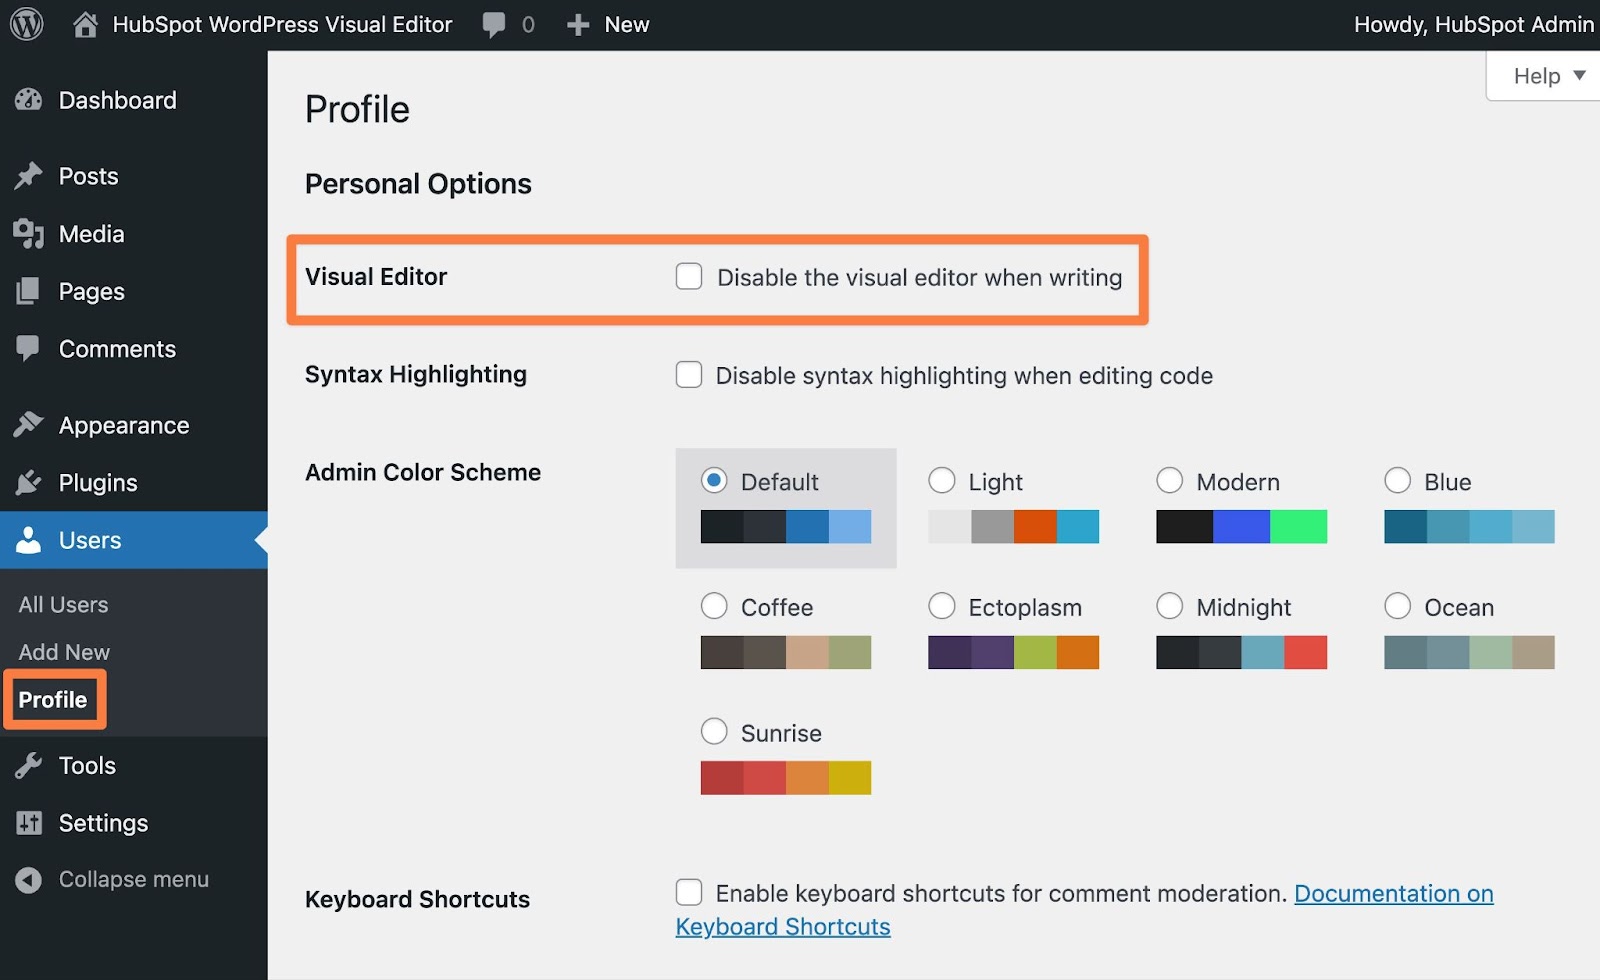 How to enable the Visual Editor in your profile settings